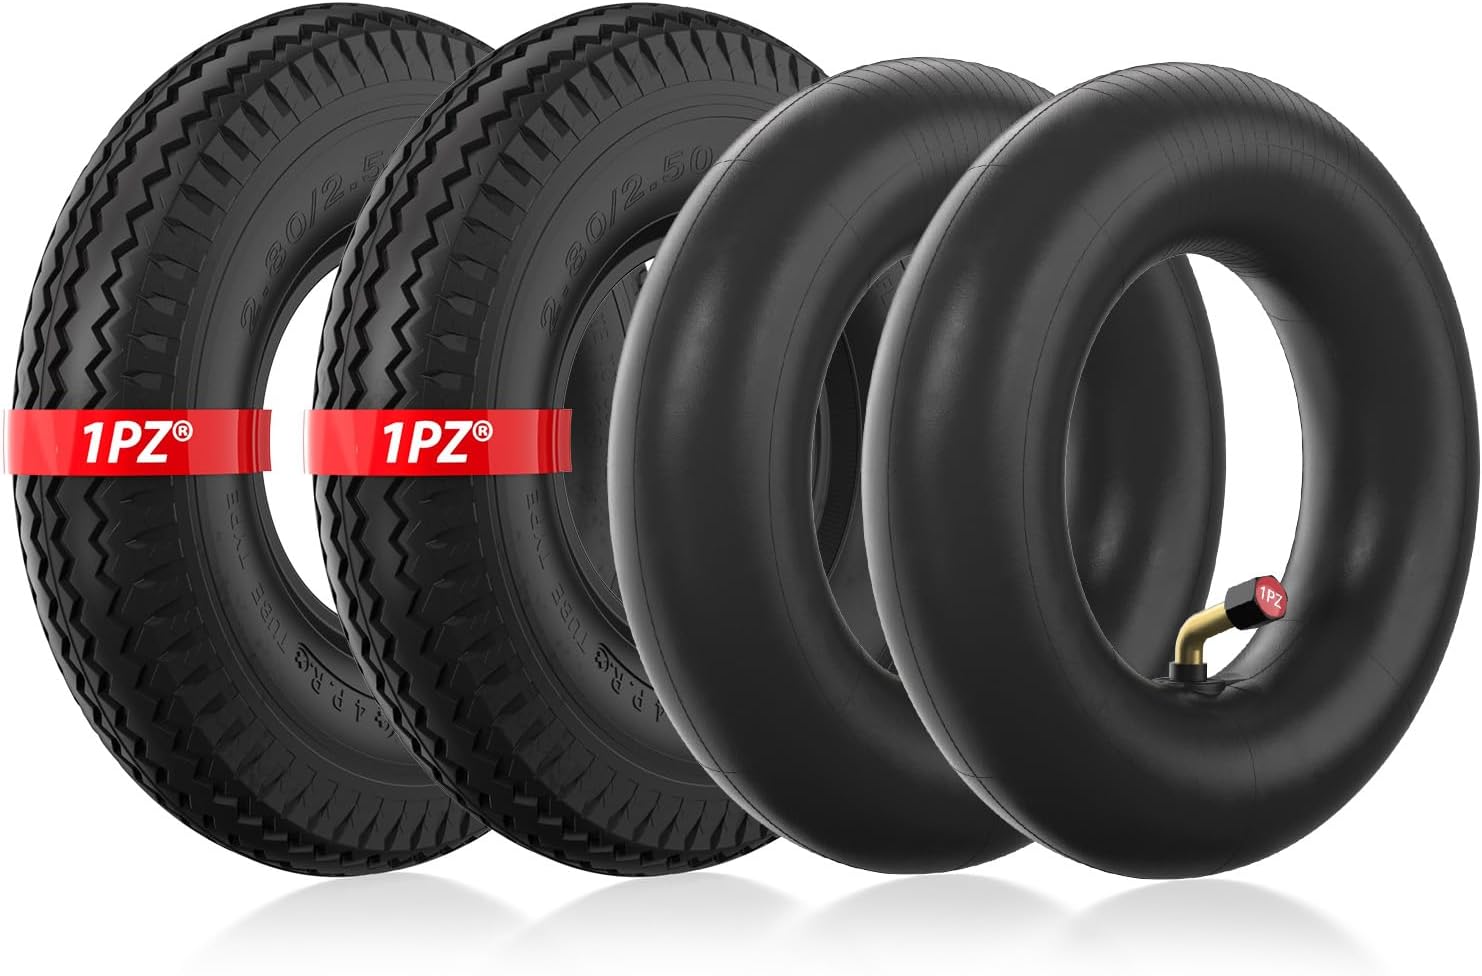 1PZ 2.80/2.50-4" Tire & Inner Tube with TR87 Bent Valve Stem for Utility Cart Dolly Hand Truck Wheelbarrows Trolly Lawn Mowers (2 Set)